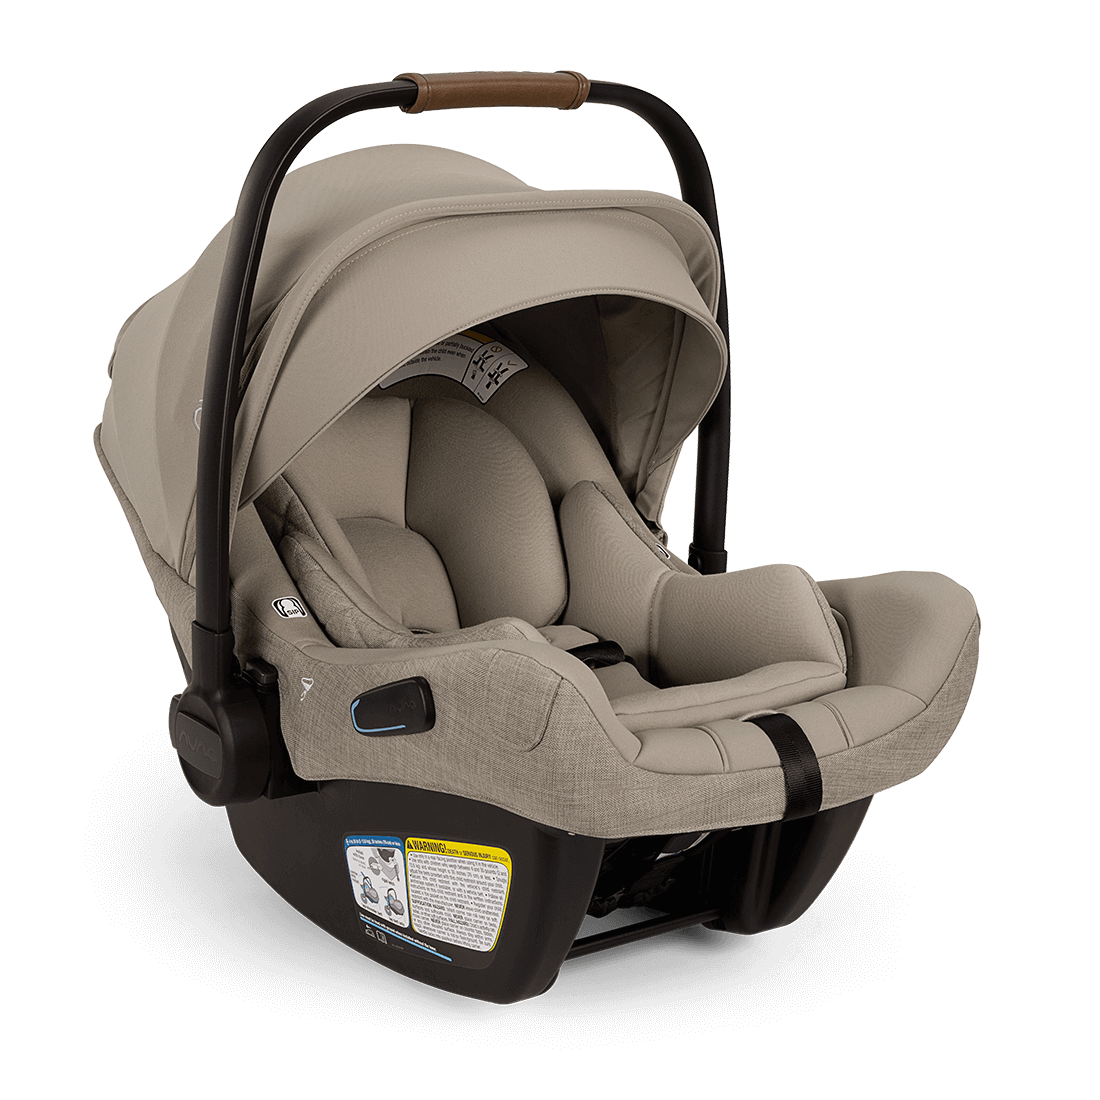 Nuna PIPA Aire RX Infant Car Seat with RELX Base, -- ANB Baby